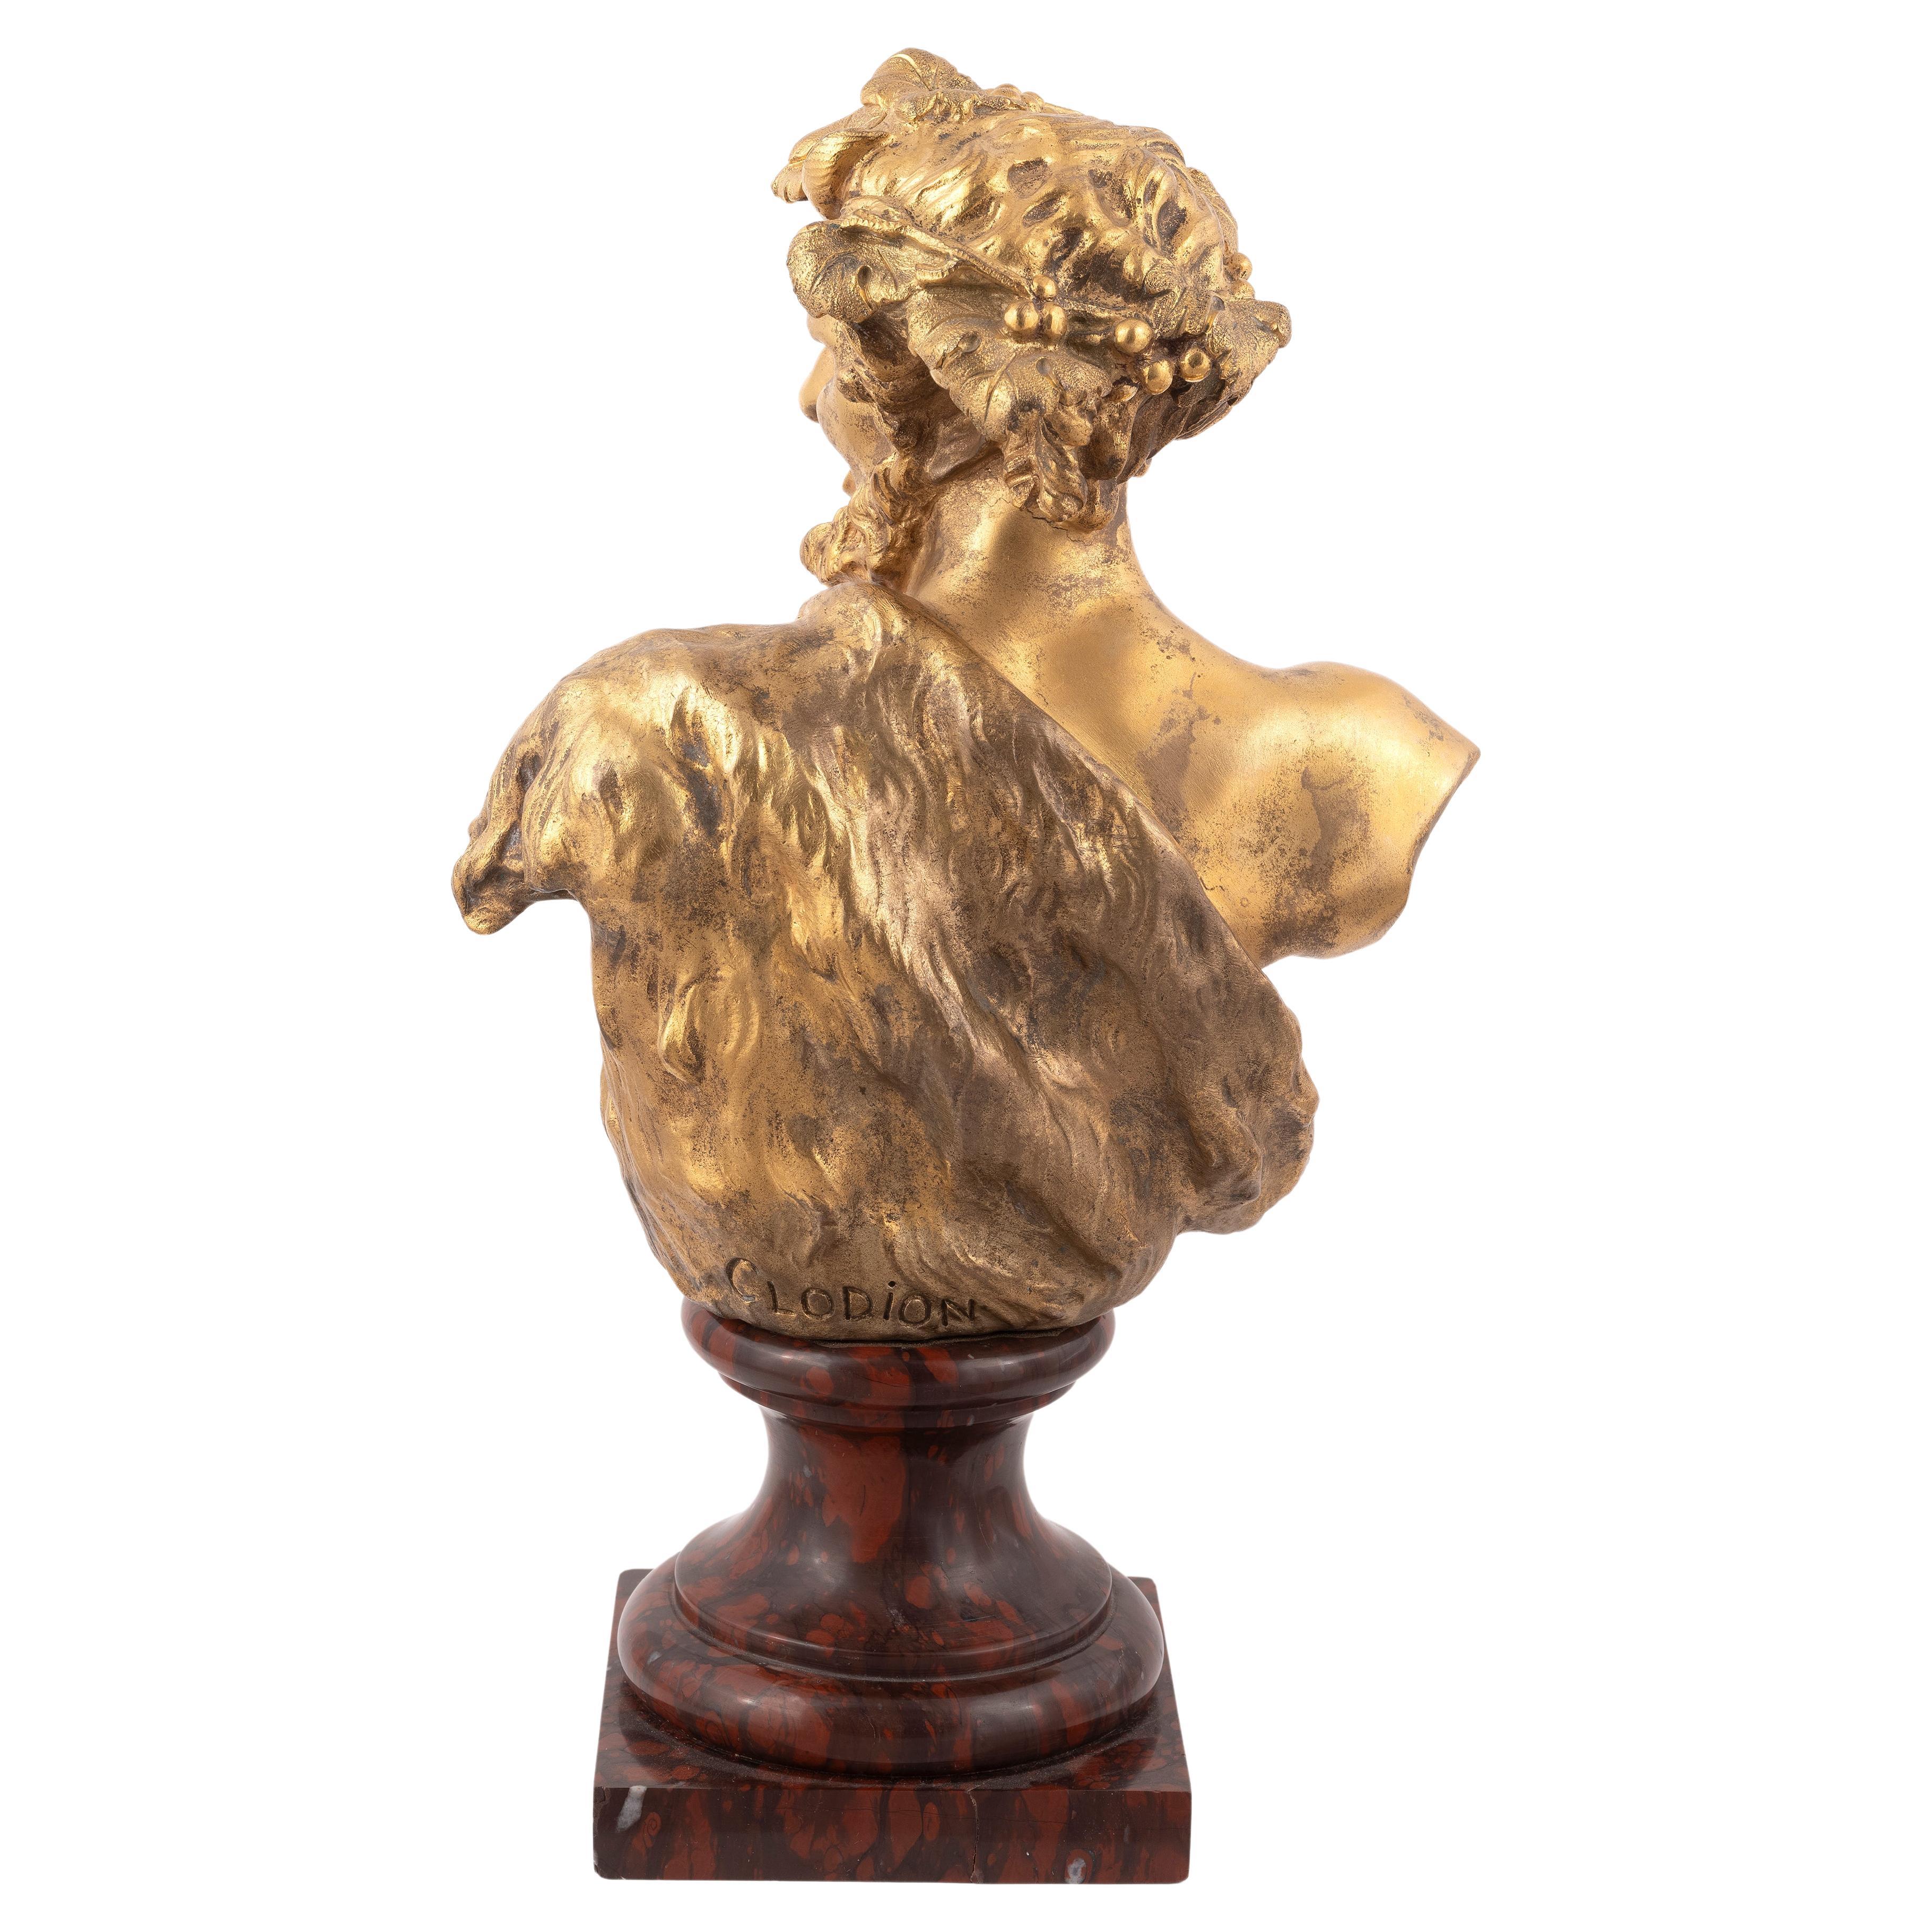 Shipping policy
No additional costs will be added to this order.
Shipping costs will be totally covered by the seller (customs duties included). 

Modeled as a satyr, incised CLODION, raised on variegated red and green marble plinth.
height 13in